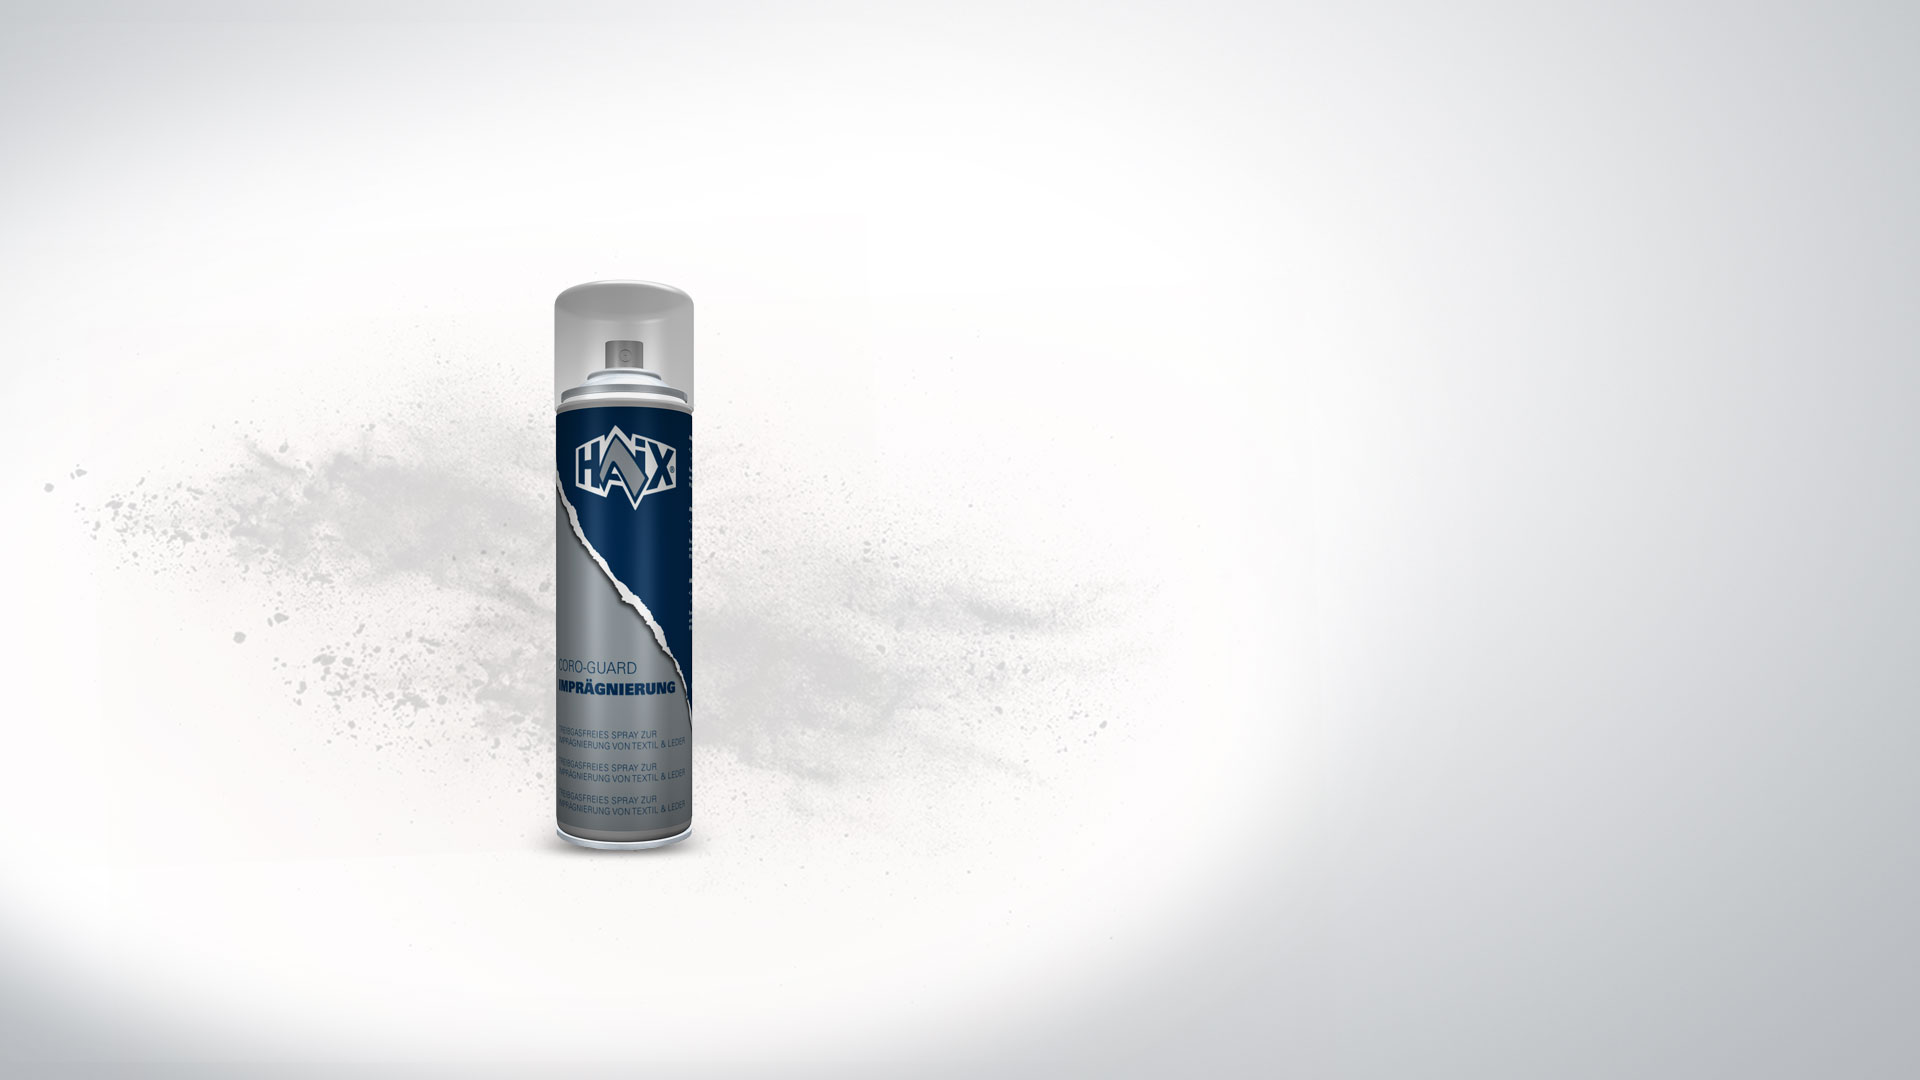 HAIX Waterproof Spray, Optimal protection of your boots and textiles  against water, dirt, oil and grease!